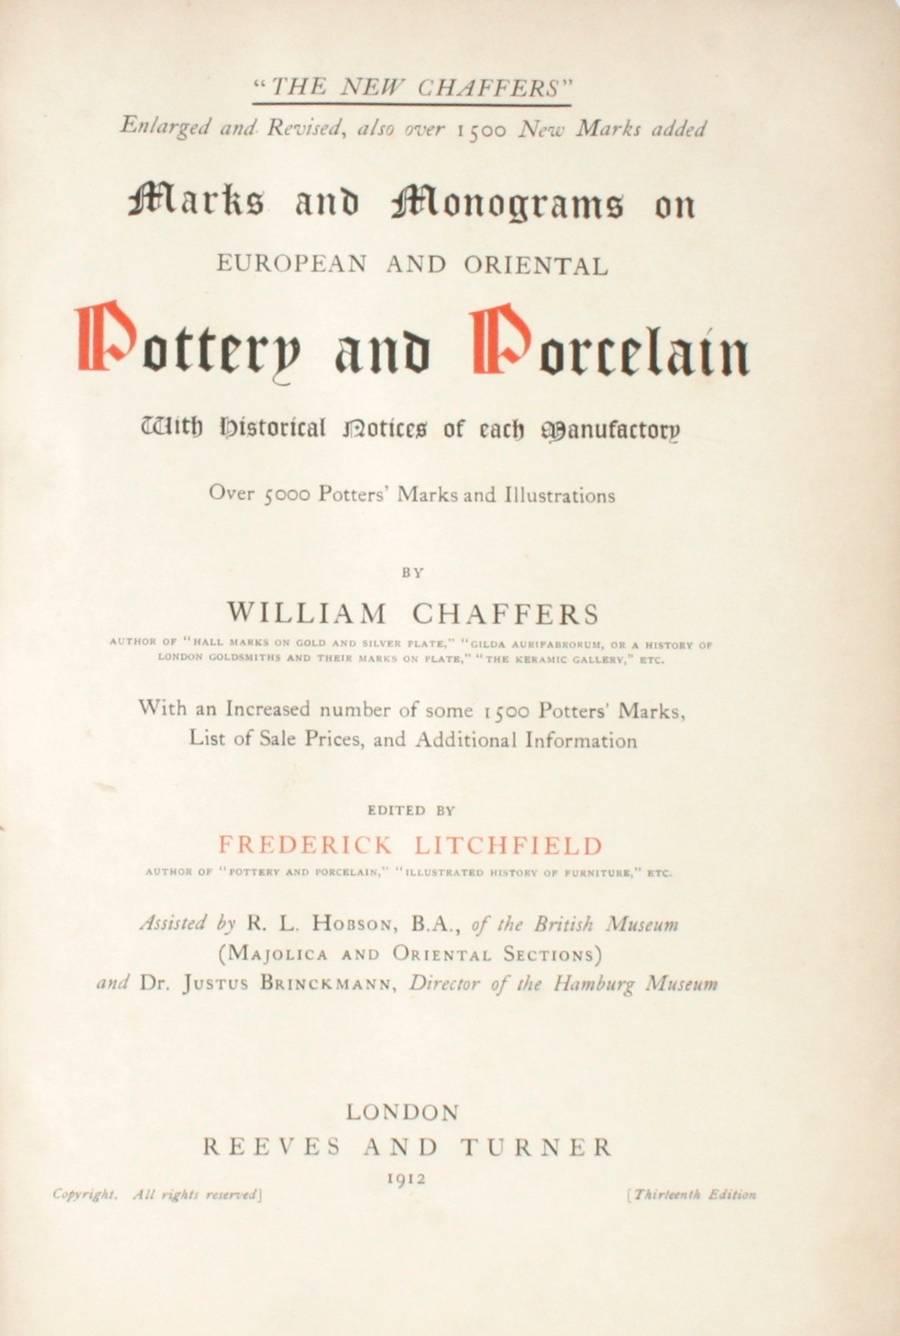 The New Chaffers Marks and Monograms on Pottery and Porcelain. London: Reeves and Turner, 1912. Hardcover. 1079 pp. An extensive antique catalogue of marks and monograms on European and Asian pottery and porcelain. It includes over 5000 potters'